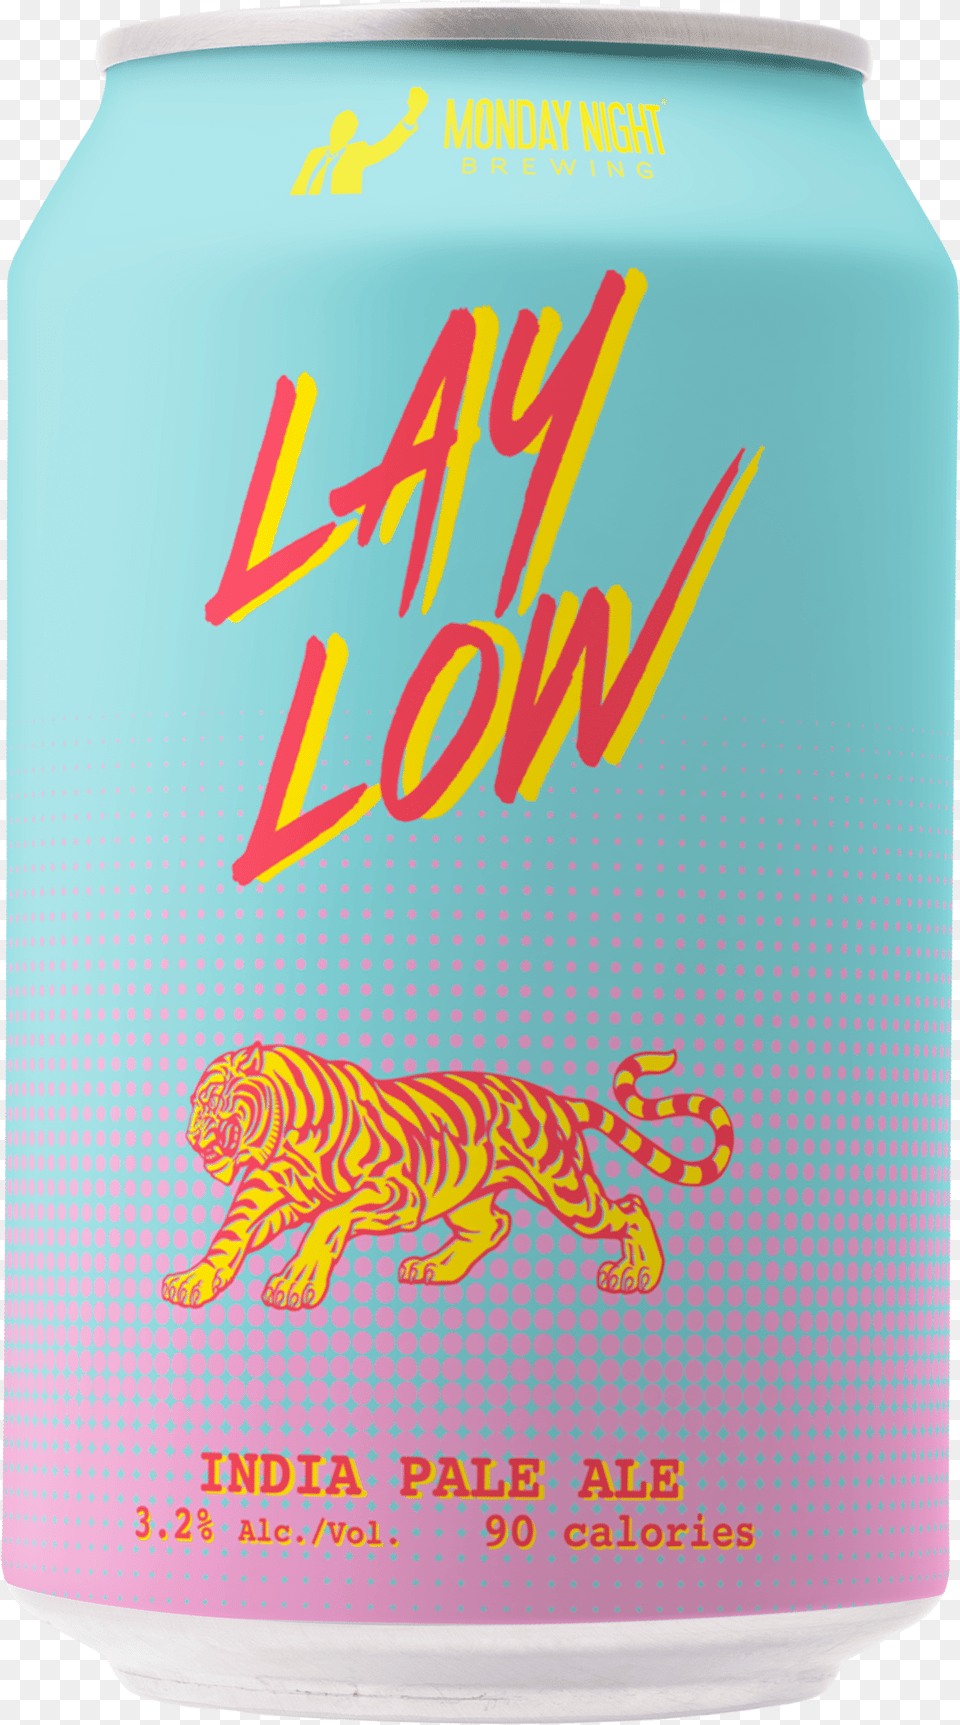 Lay Low Can Caffeinated Drink, Animal, Mammal, Tiger, Wildlife Png